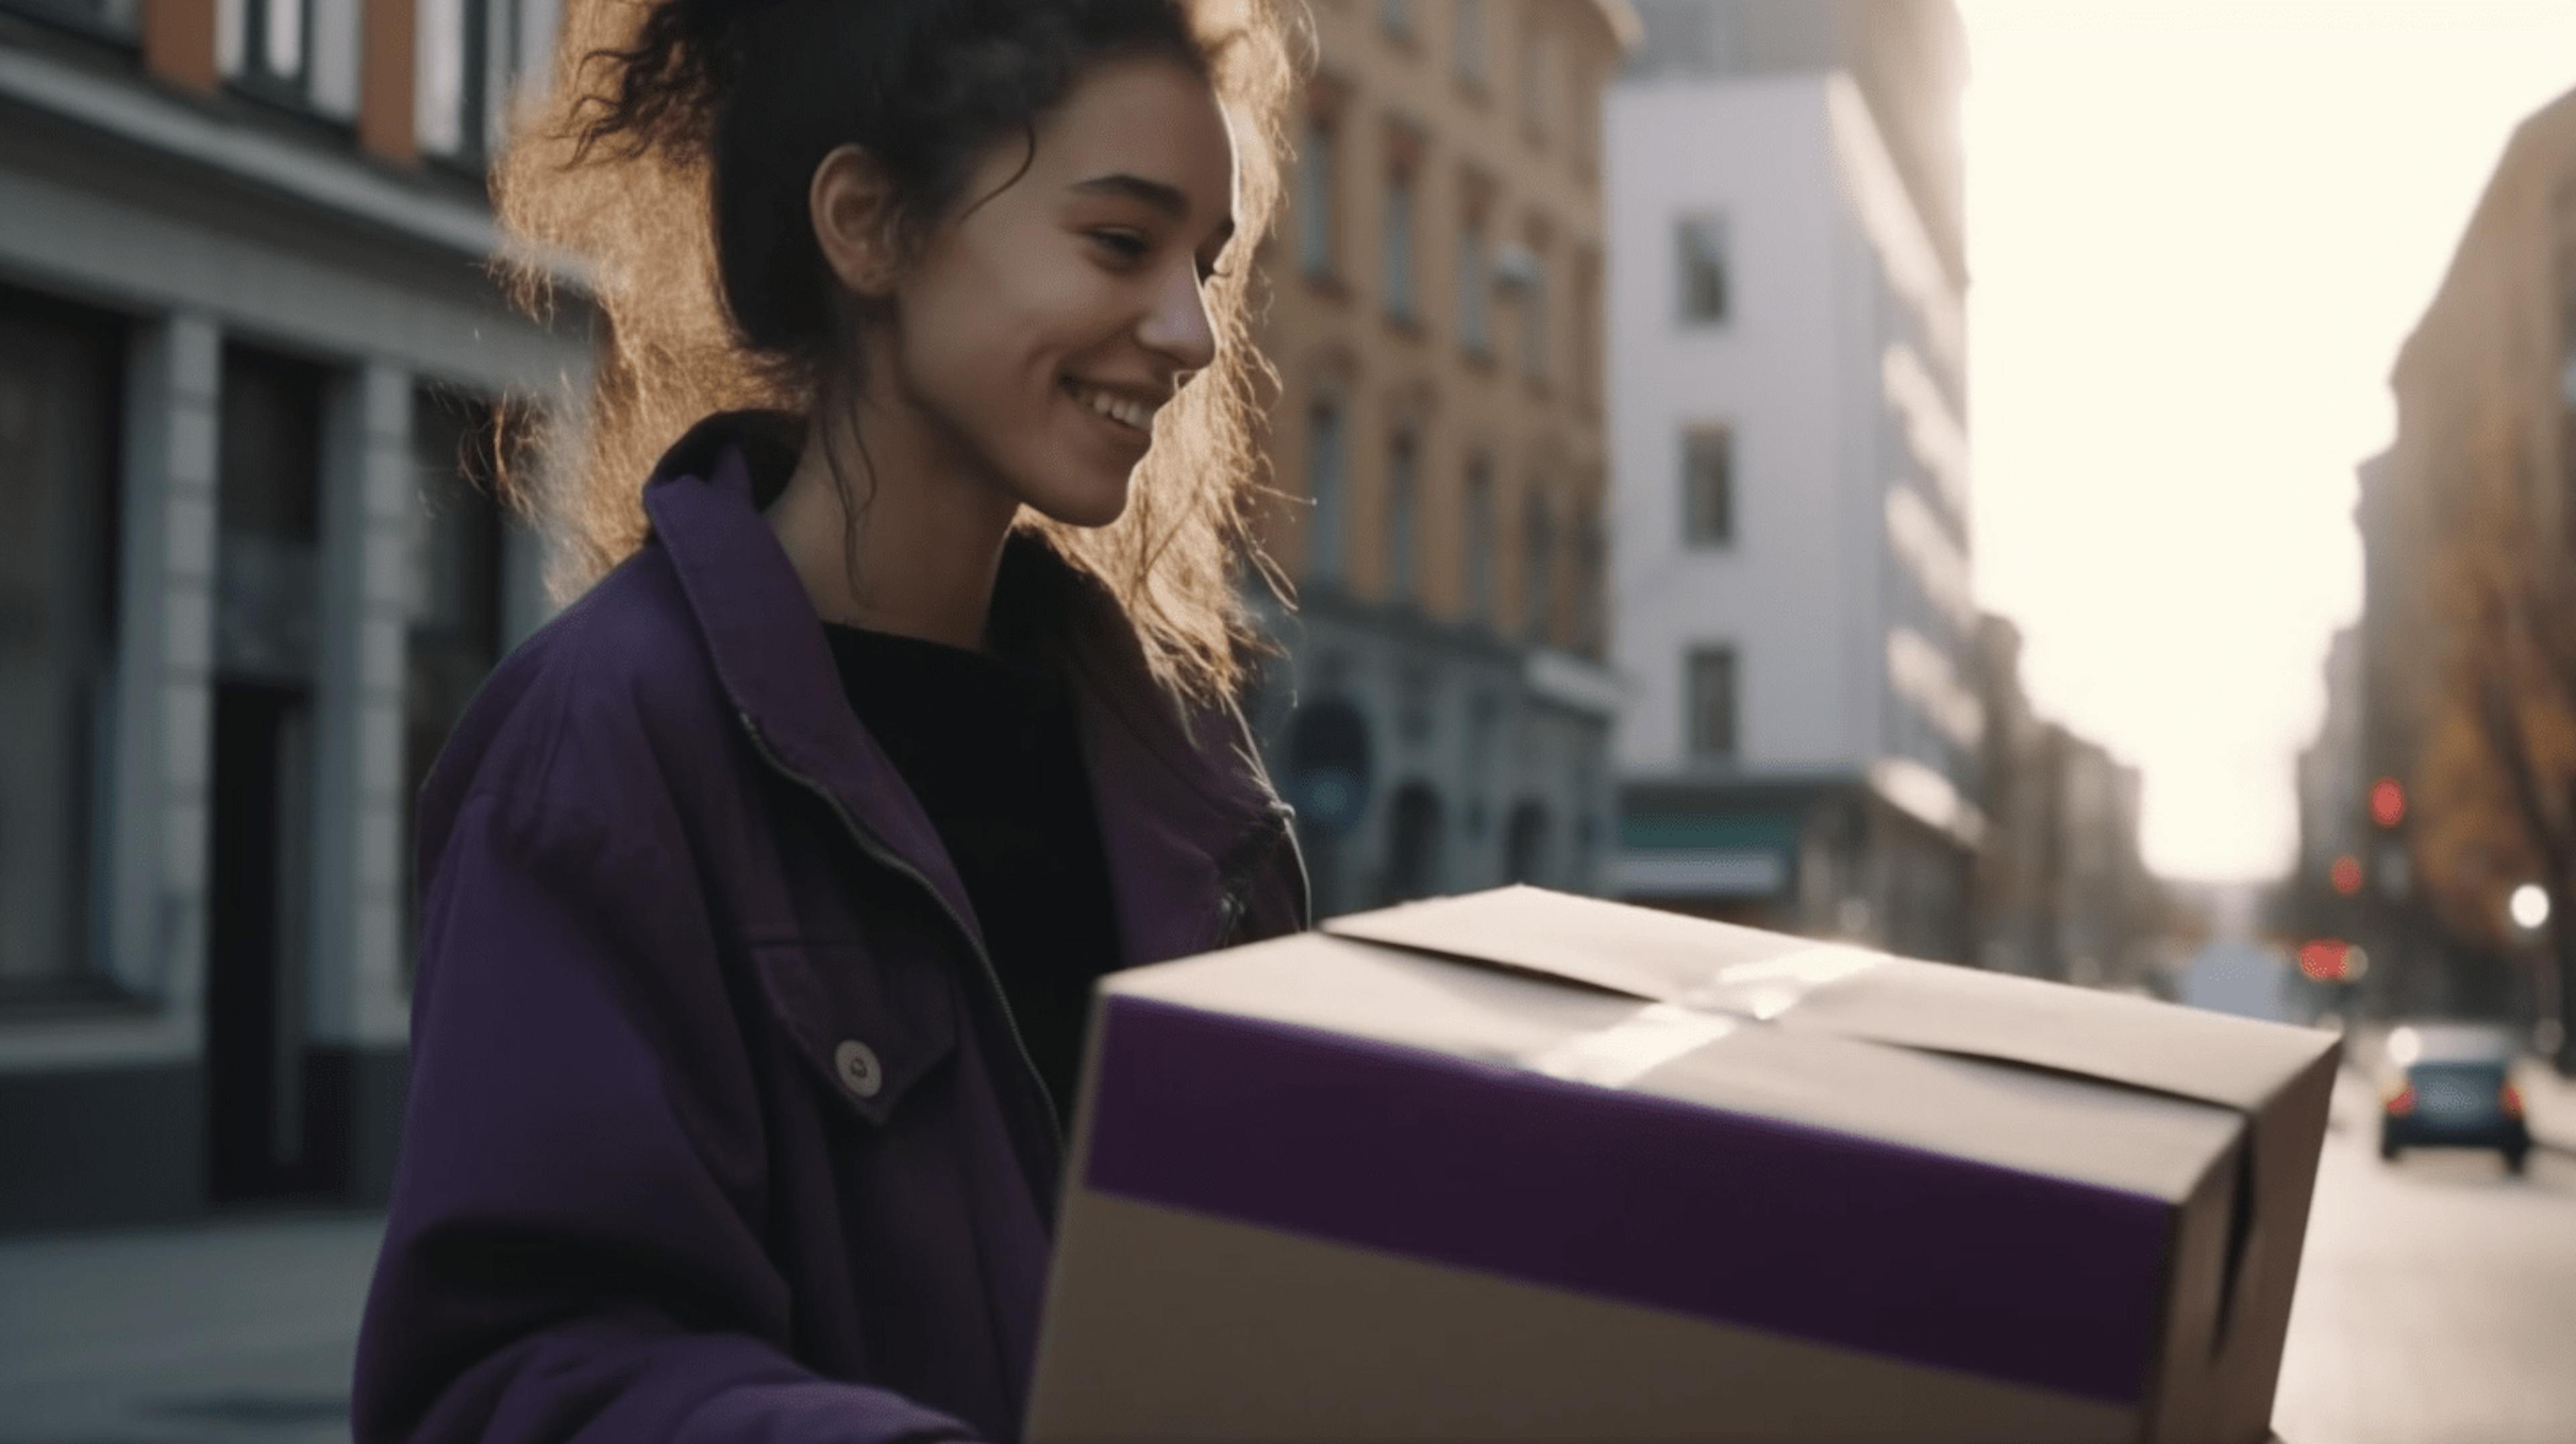 A woman happily receiving a package from a US store, delivered via international shipping